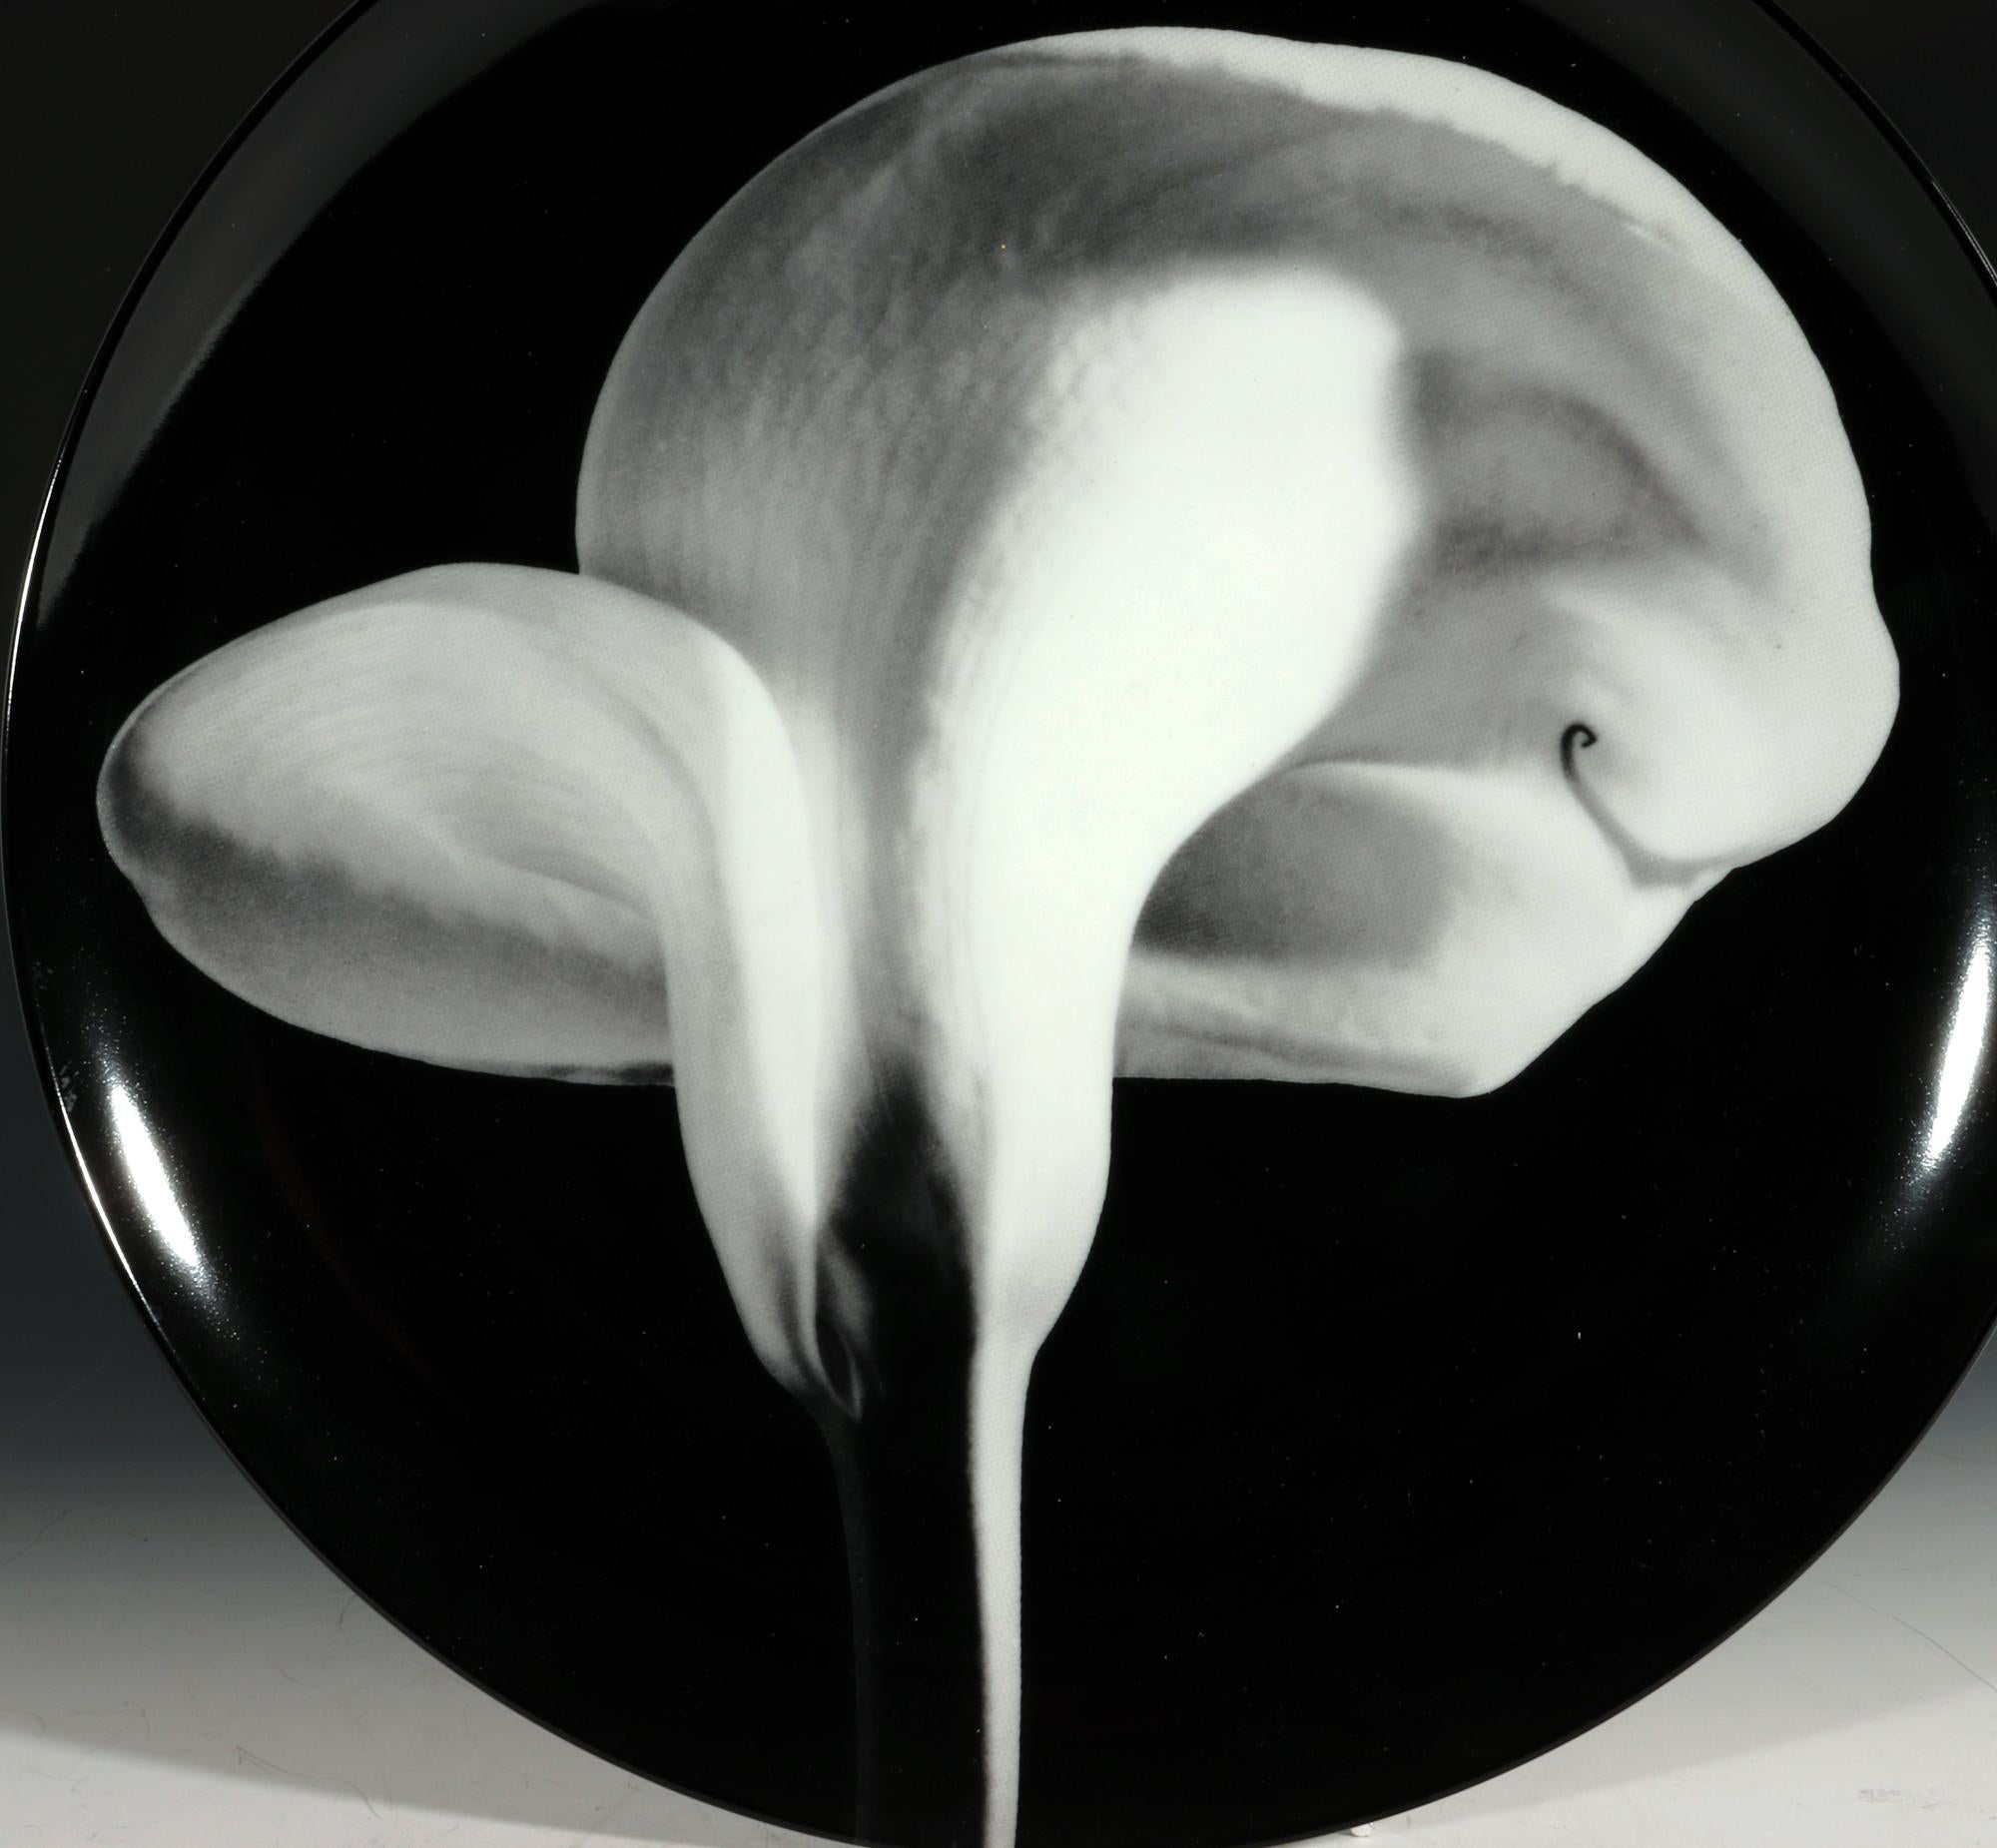 Robert Mapplethorpe Botanical Plate,
Orchid, 1987
Made for Swid Powell,

The Robert Mapplethorpe plate depicts an Orchid made in 1987. It is lithographically printed porcelain based on Robert Mapplethorpe's photographs and made by Swid